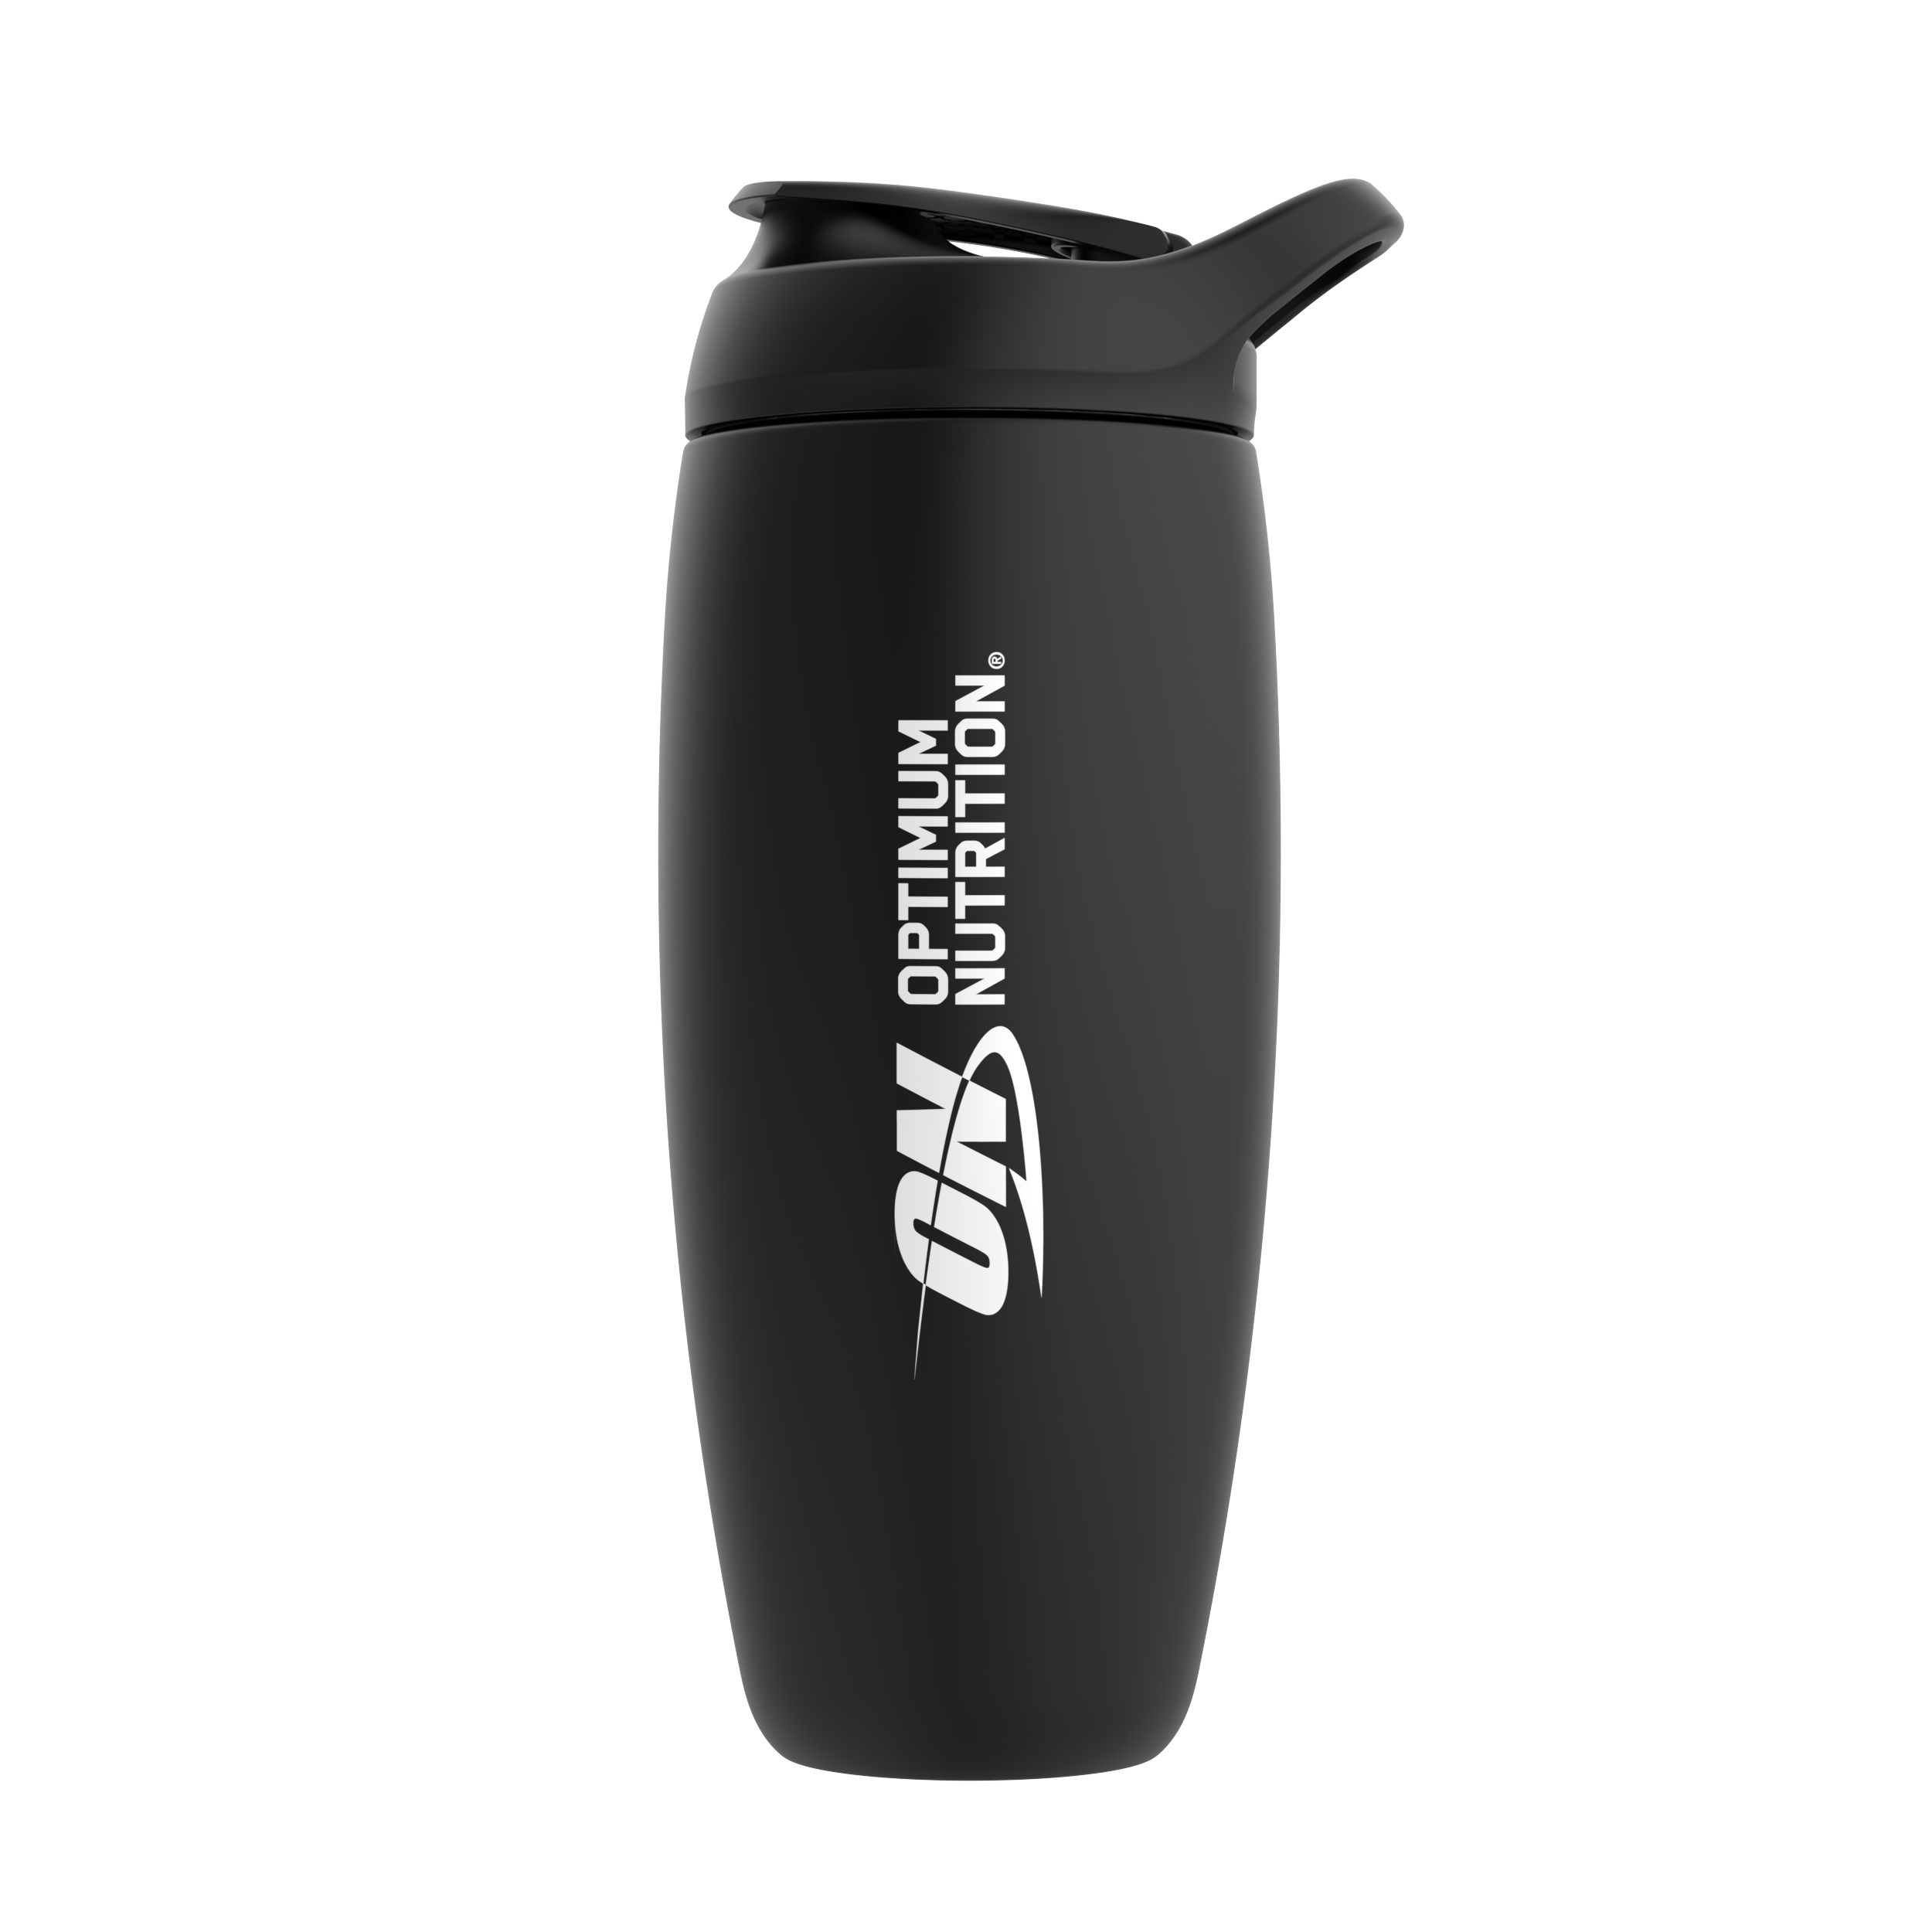 Accessories and Clothing | Optimum Nutrition UK